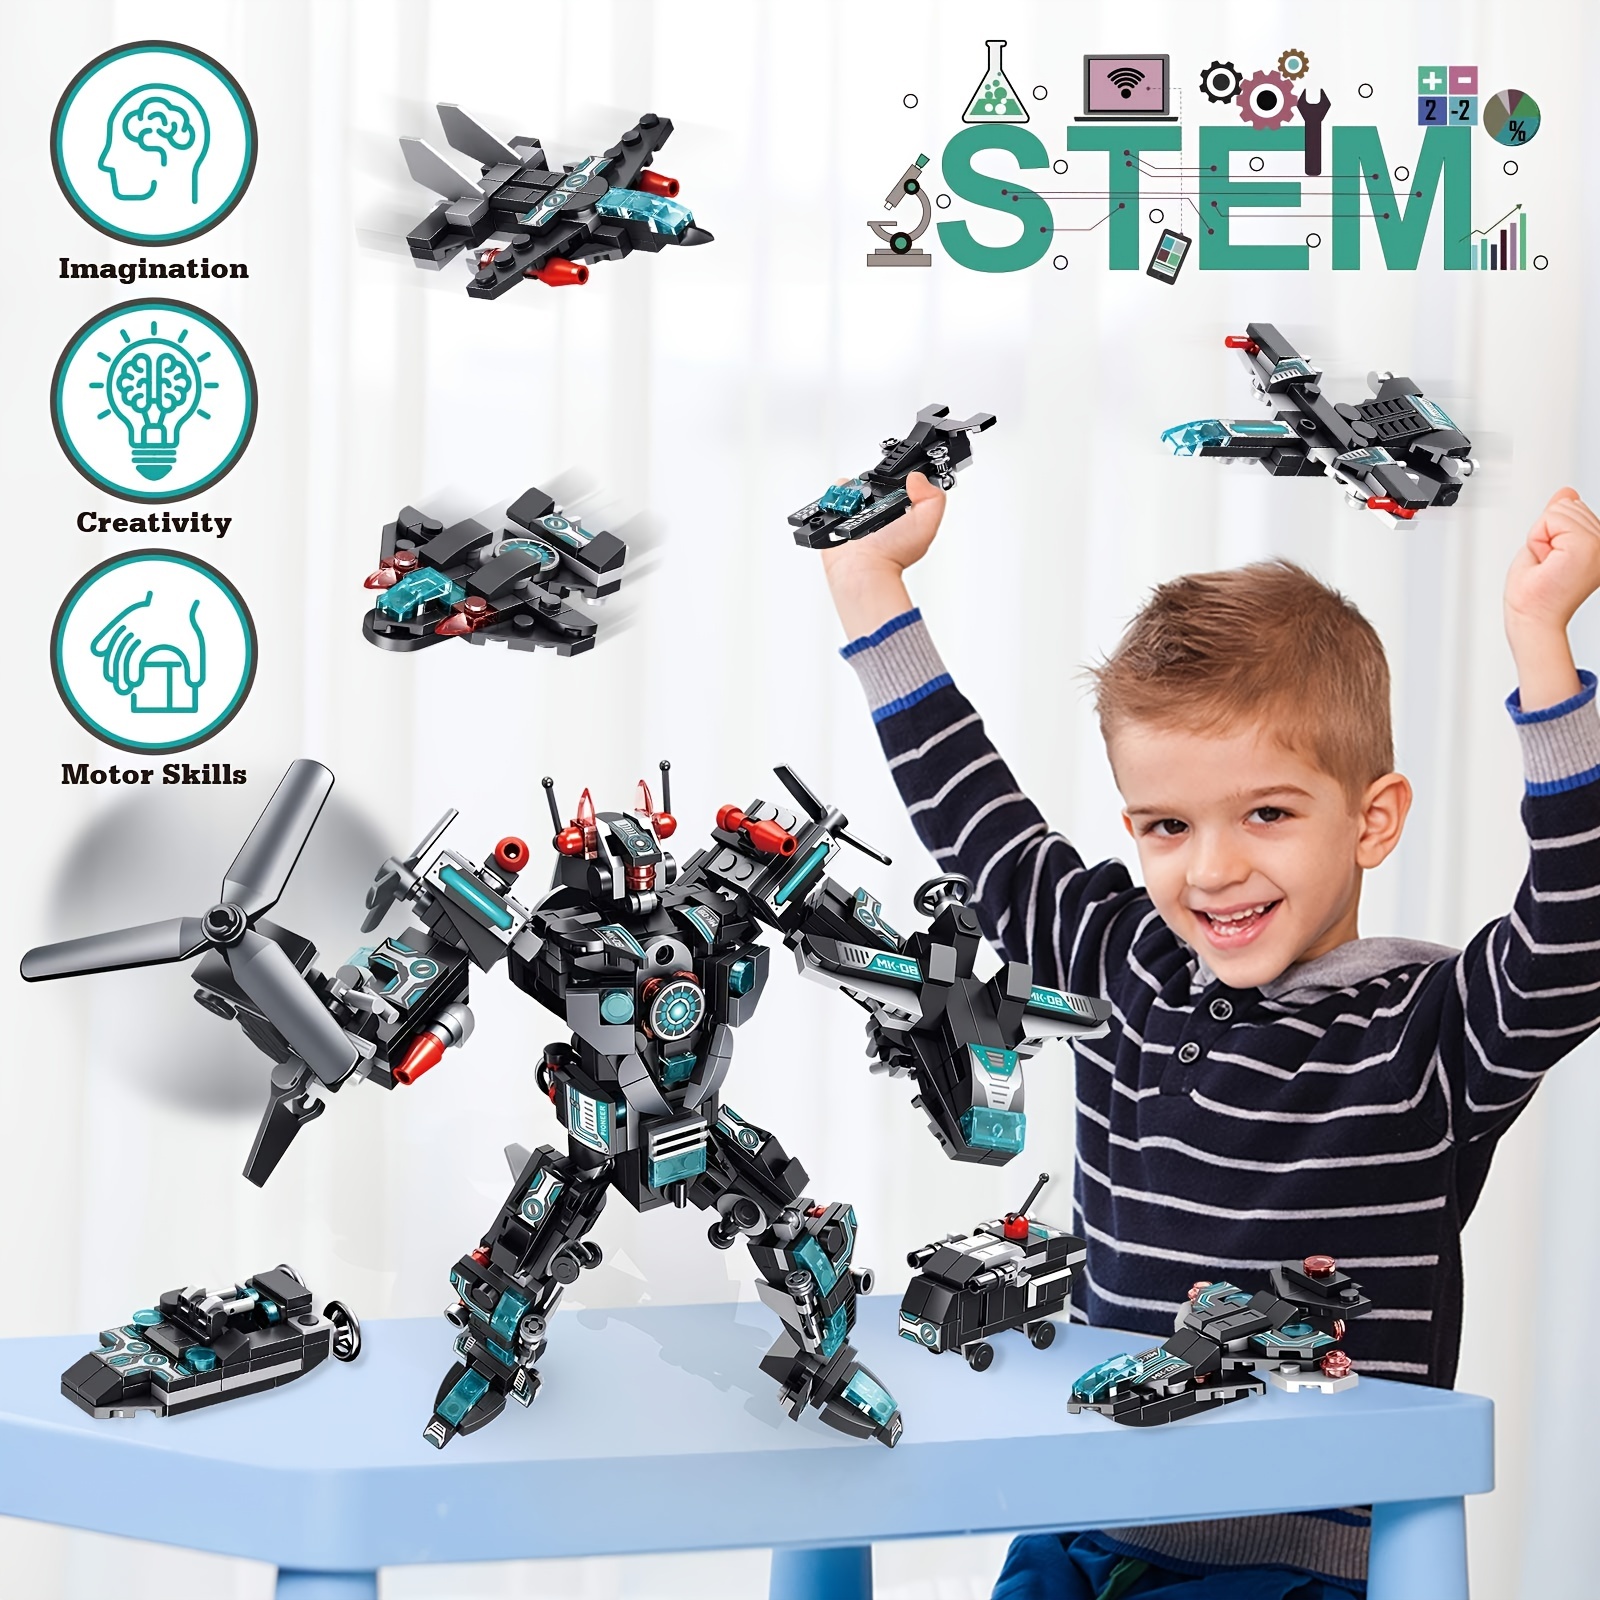 STEM TOYS FOR 10 YEAR OLDS. THE ULTIMATE BIRTHDAY GIFTS. - JitteryGit